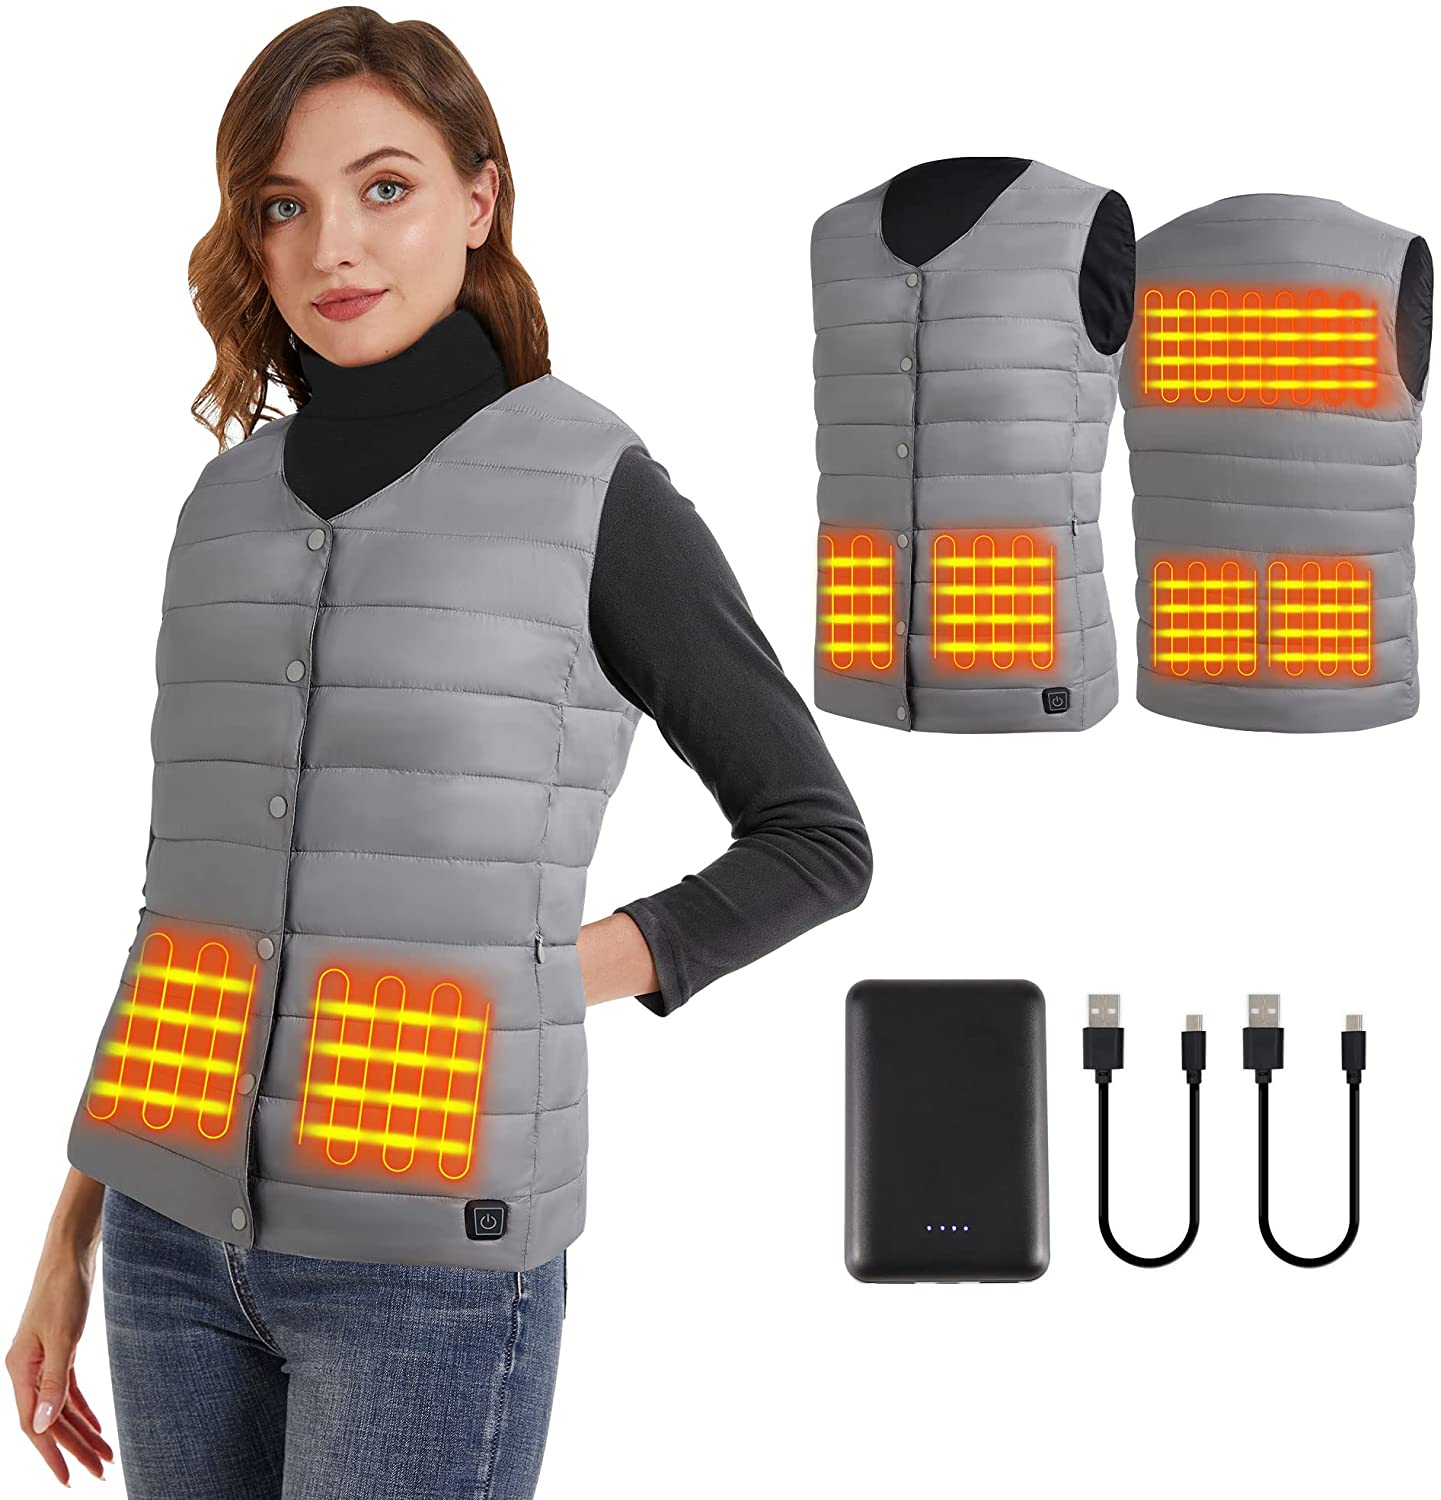 Heated Vest for Women with Battery Pack Reversible Heated Clothing Lightweight USB Electric Heated Jacket 